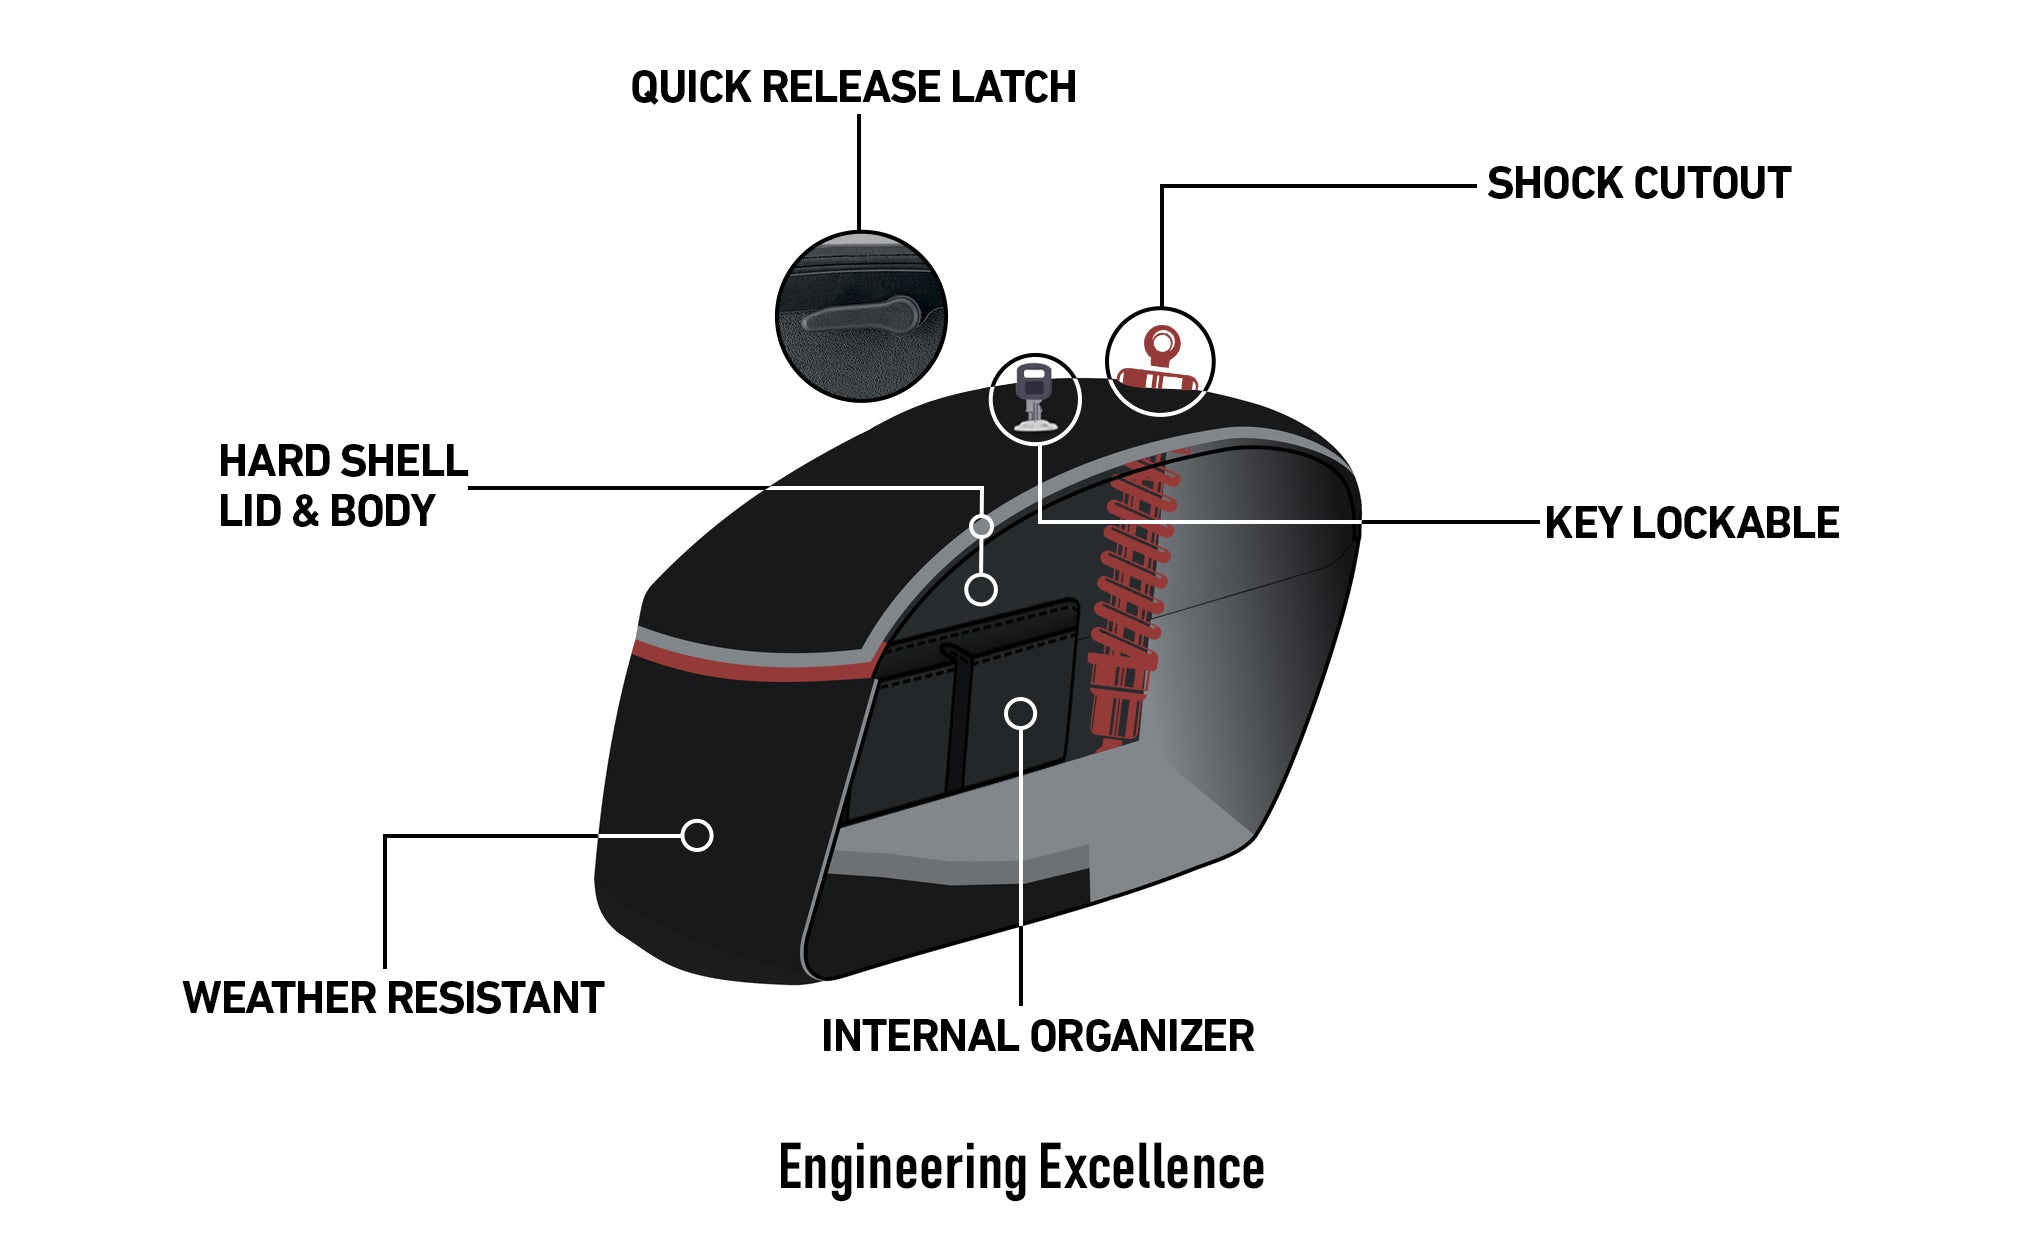 Viking Lamellar Vale Extra Large Shock Cut Out Matte Motorcycle Hard Saddlebags For Harley Dyna Wide Glide Fxdwg I Engineering Excellence with Bag on Bike @expand